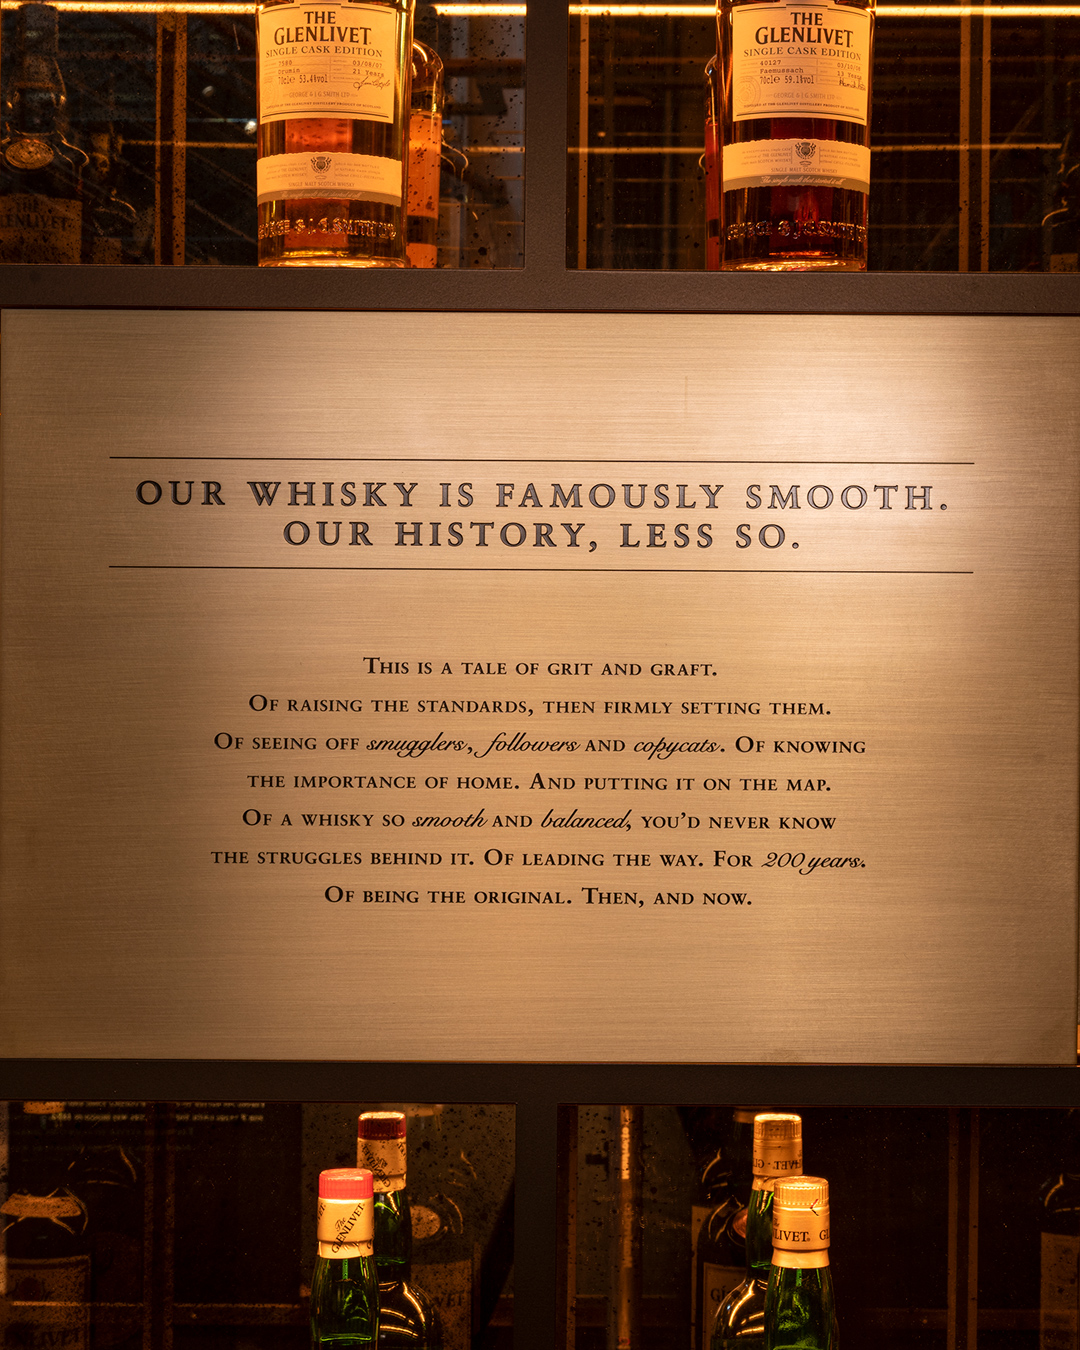 Our whisky is famously smooth. Our history, less so.